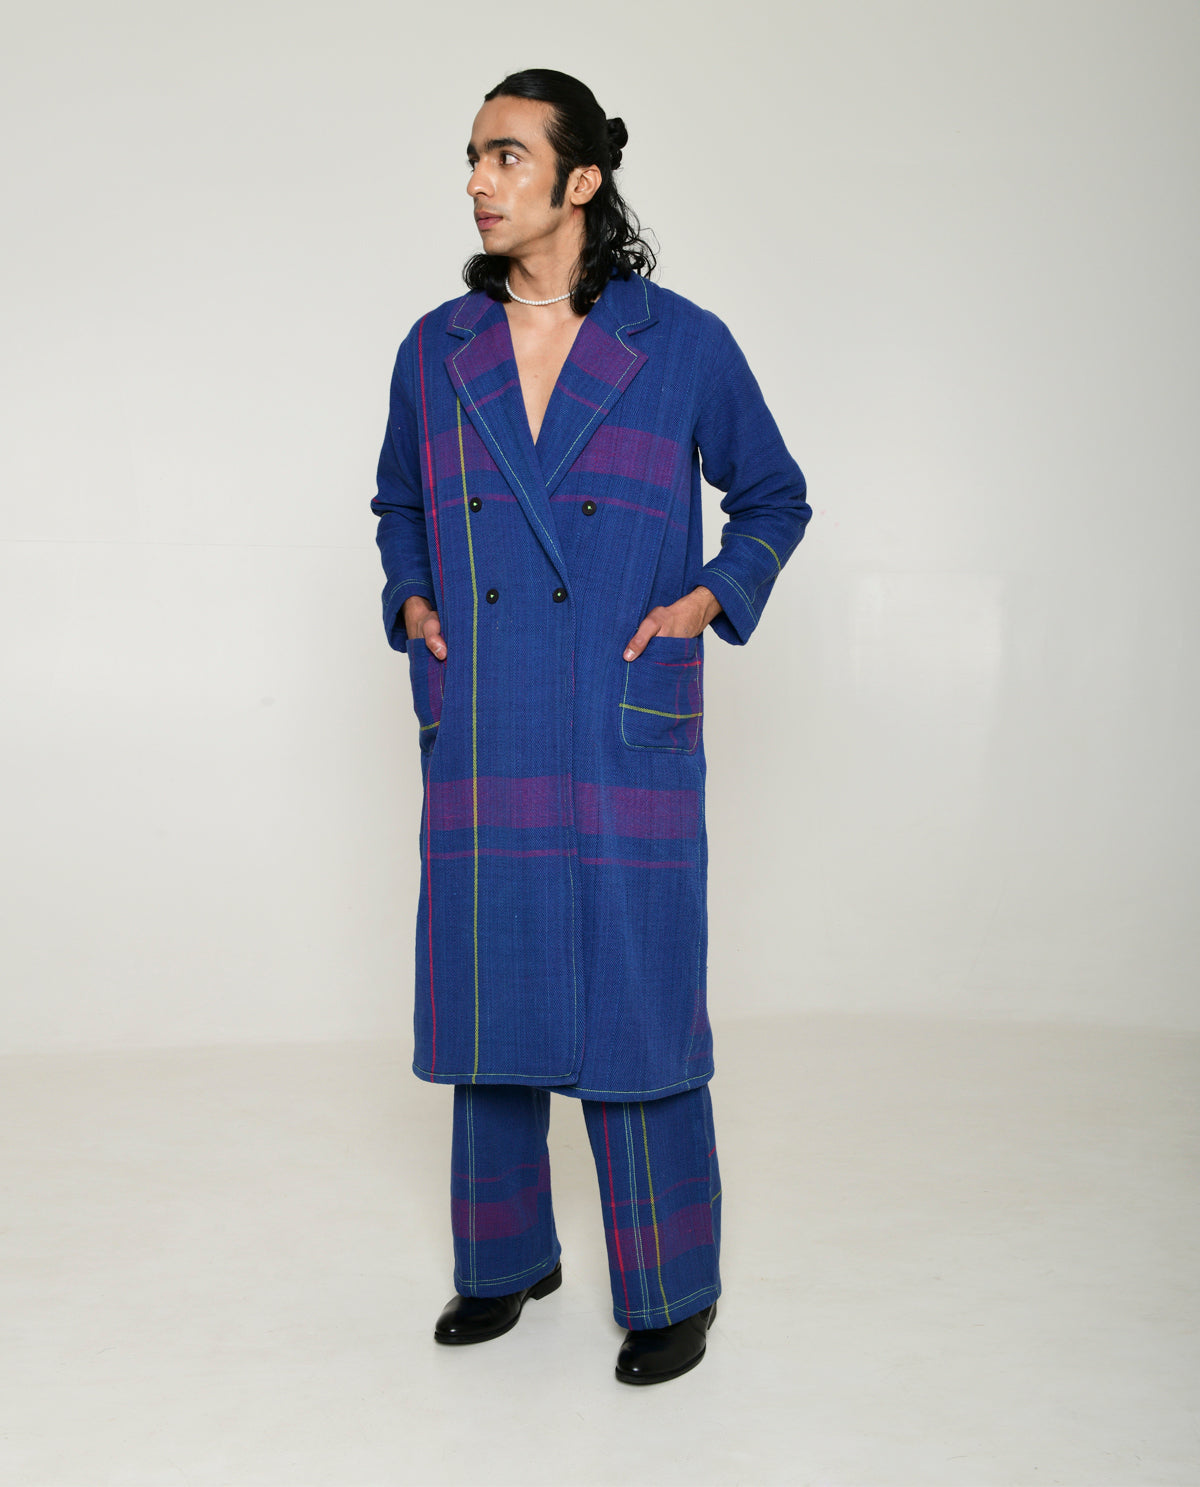 Recycled Blue Striped Cotton Trench Coat by Rias Jaipur with 100% Cotton, Blue, Casual wear, Multicolor, Natural, Overlays, RE 2.O, RE 2.O by Rias Jaipur, Regular, Stripes, Unisex, Womenswear at Kamakhyaa for sustainable fashion